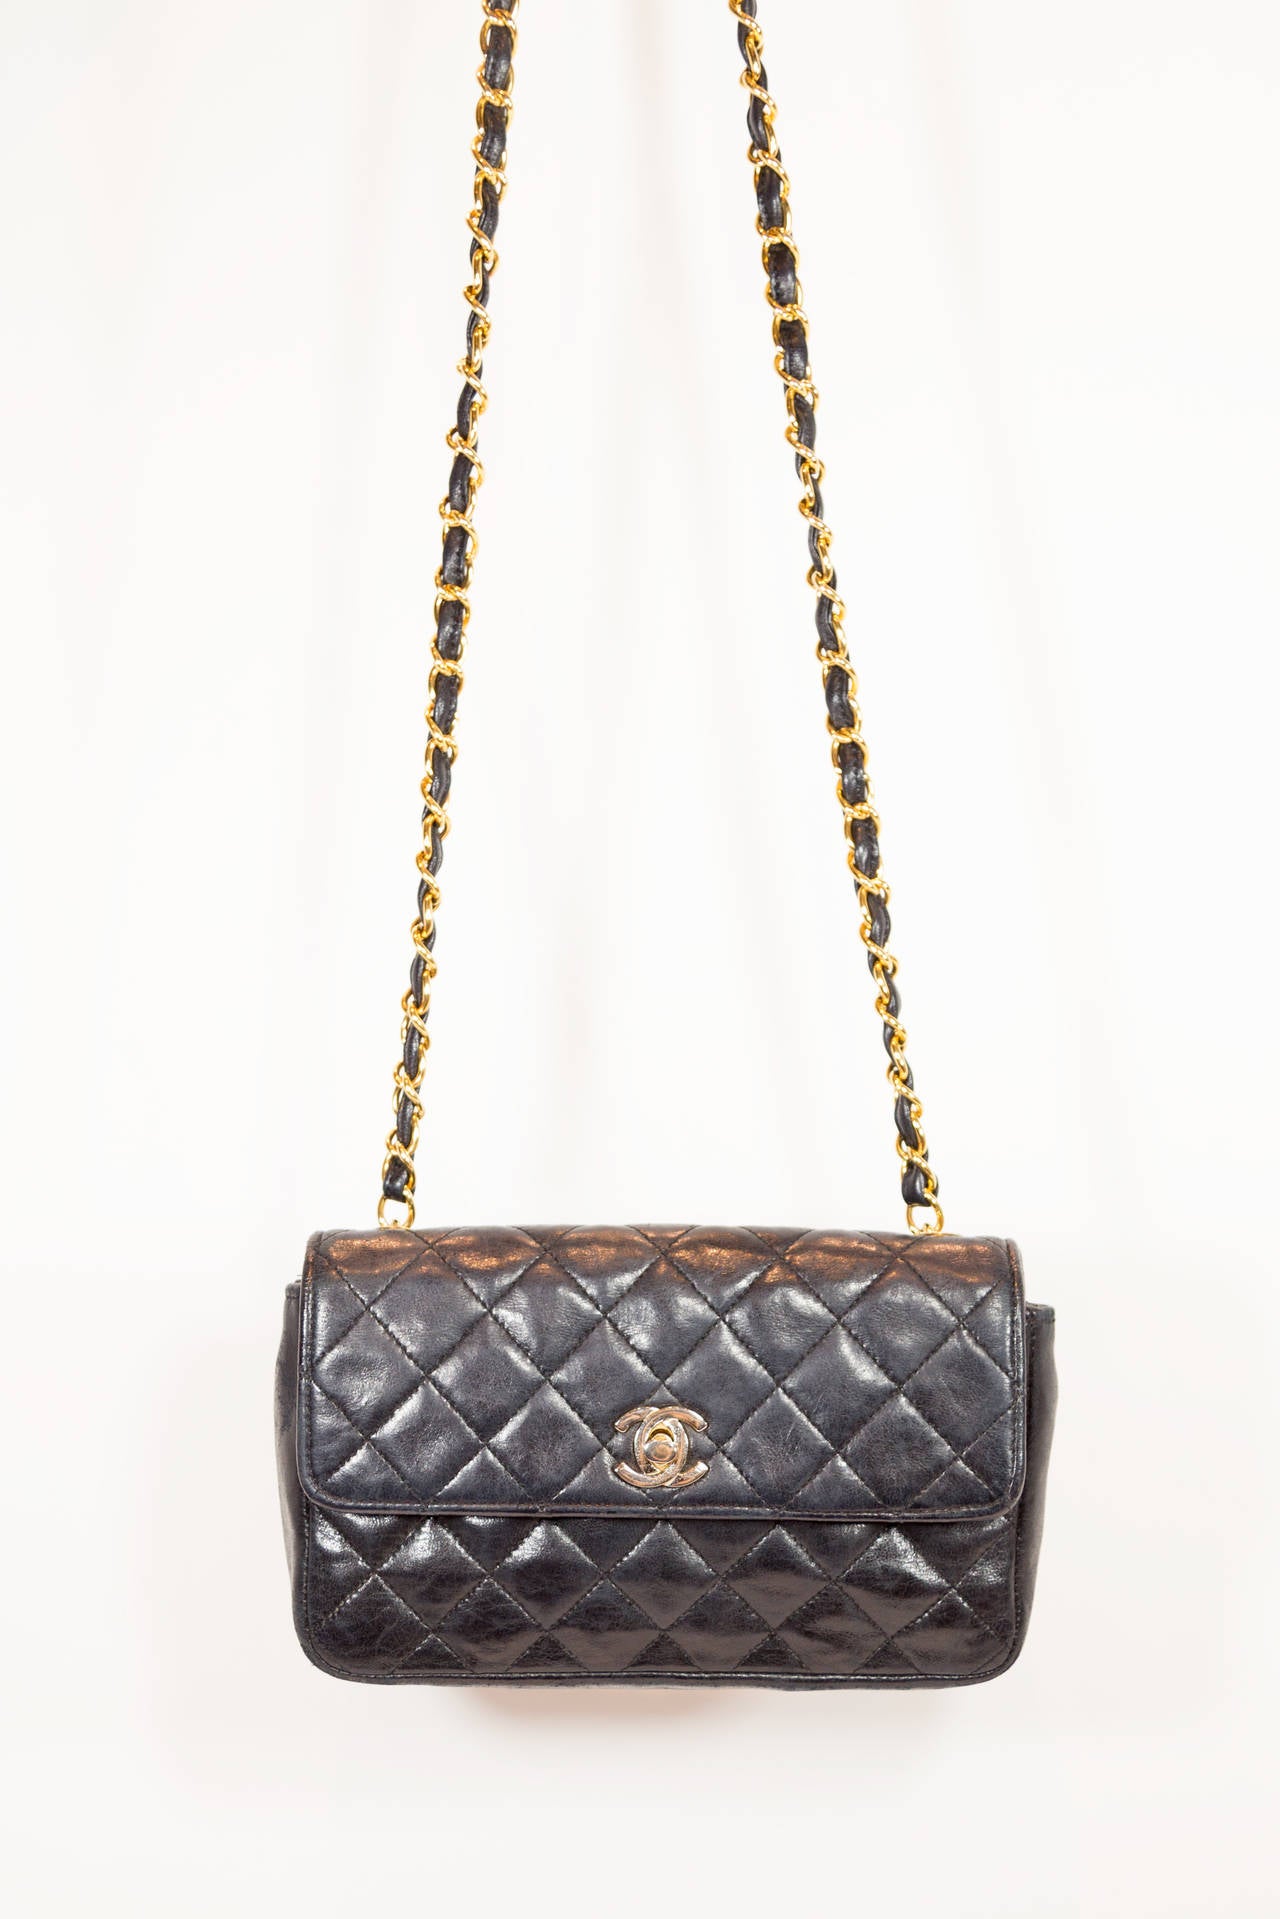 Women's Chanel Vintage Black Quilted Cross Body Bag